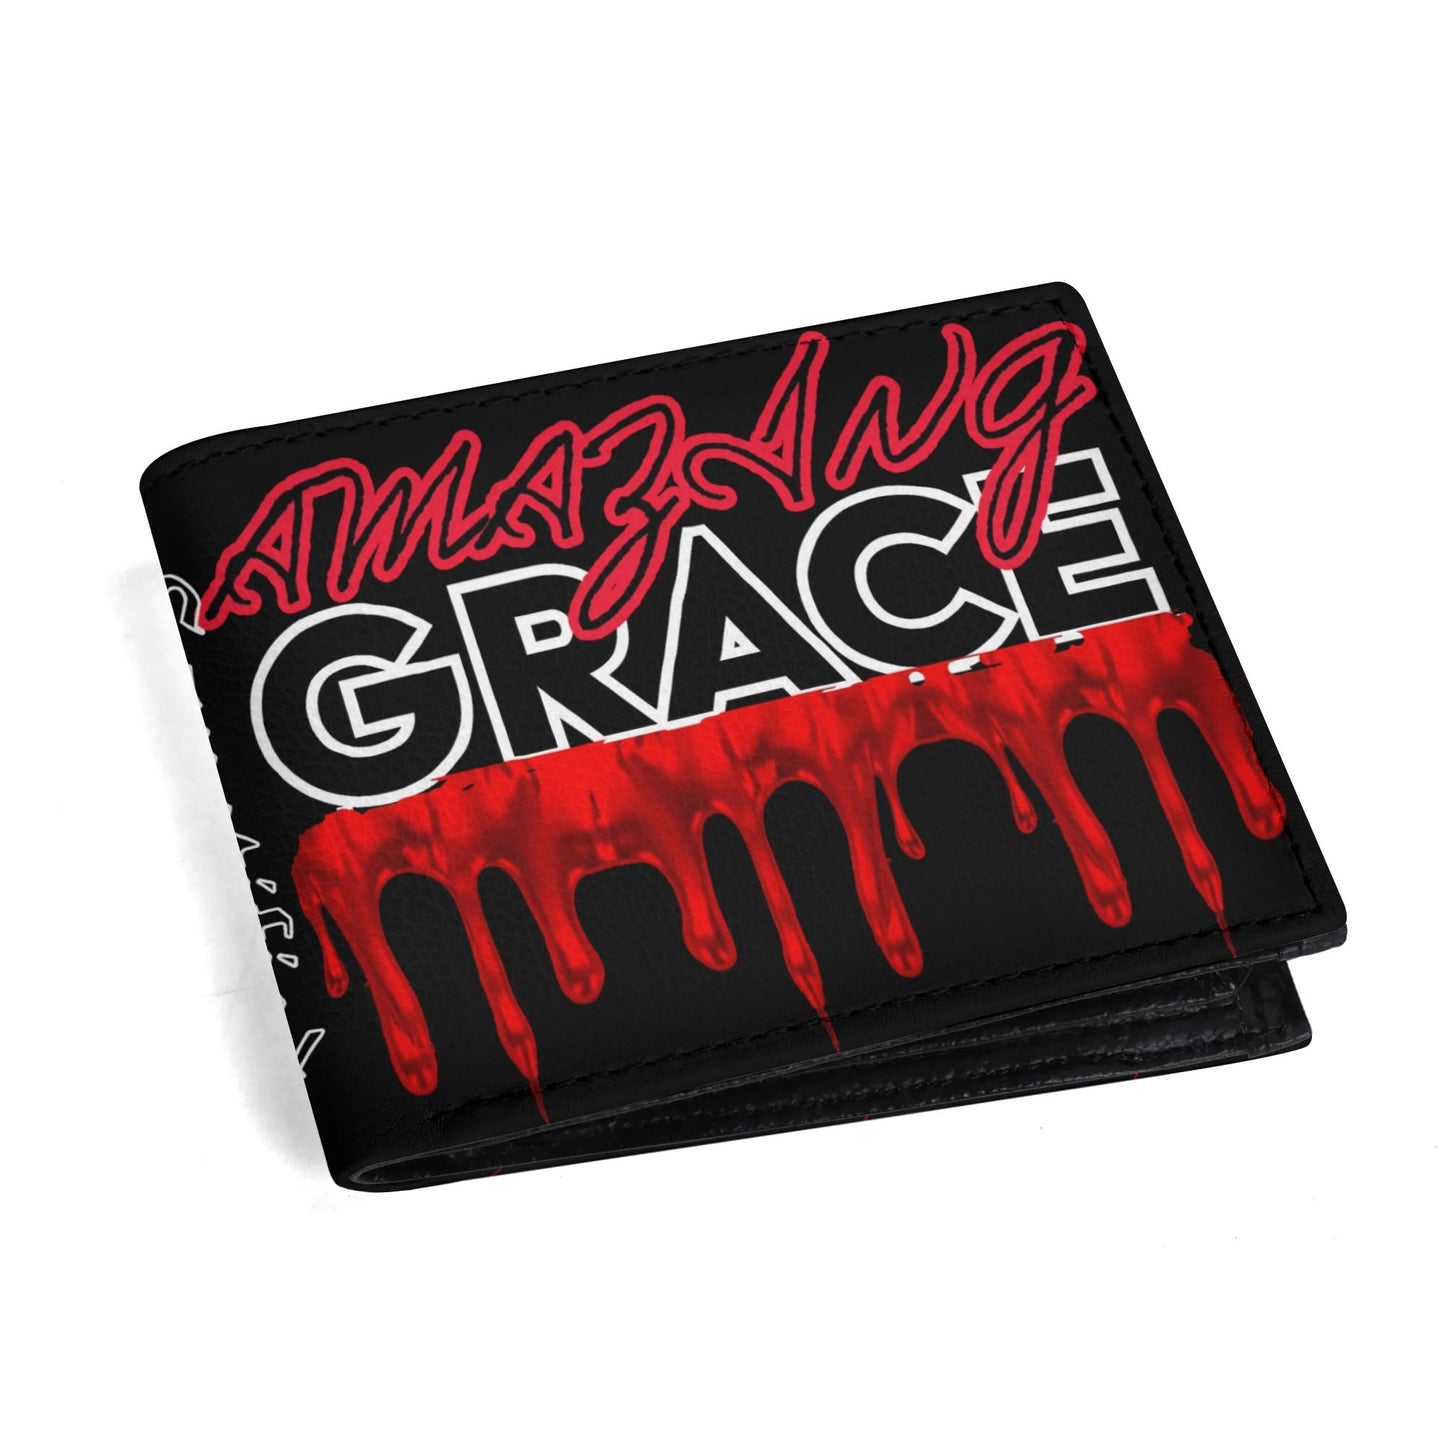 AMAZING GRACE- PU Leather Wallet Paper Folded Wallet, FREE SHIPPING